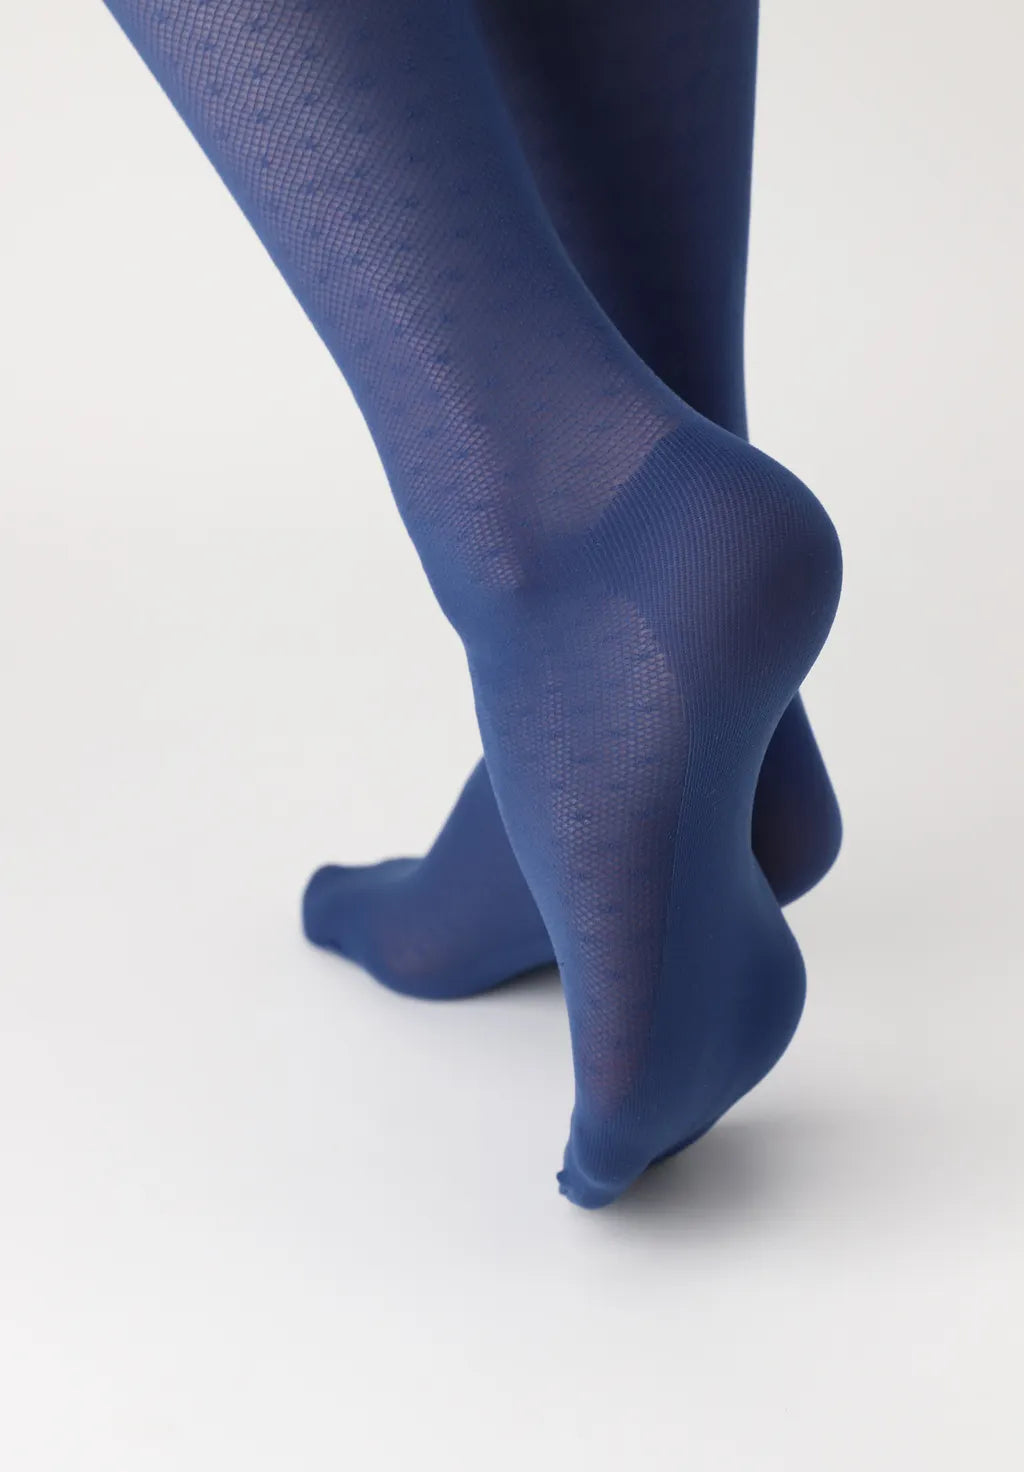 OroblÌ_ Eco Sneaker Tights - Dark Blue (marine) micro mesh recycled tights with a polka dot spot pattern